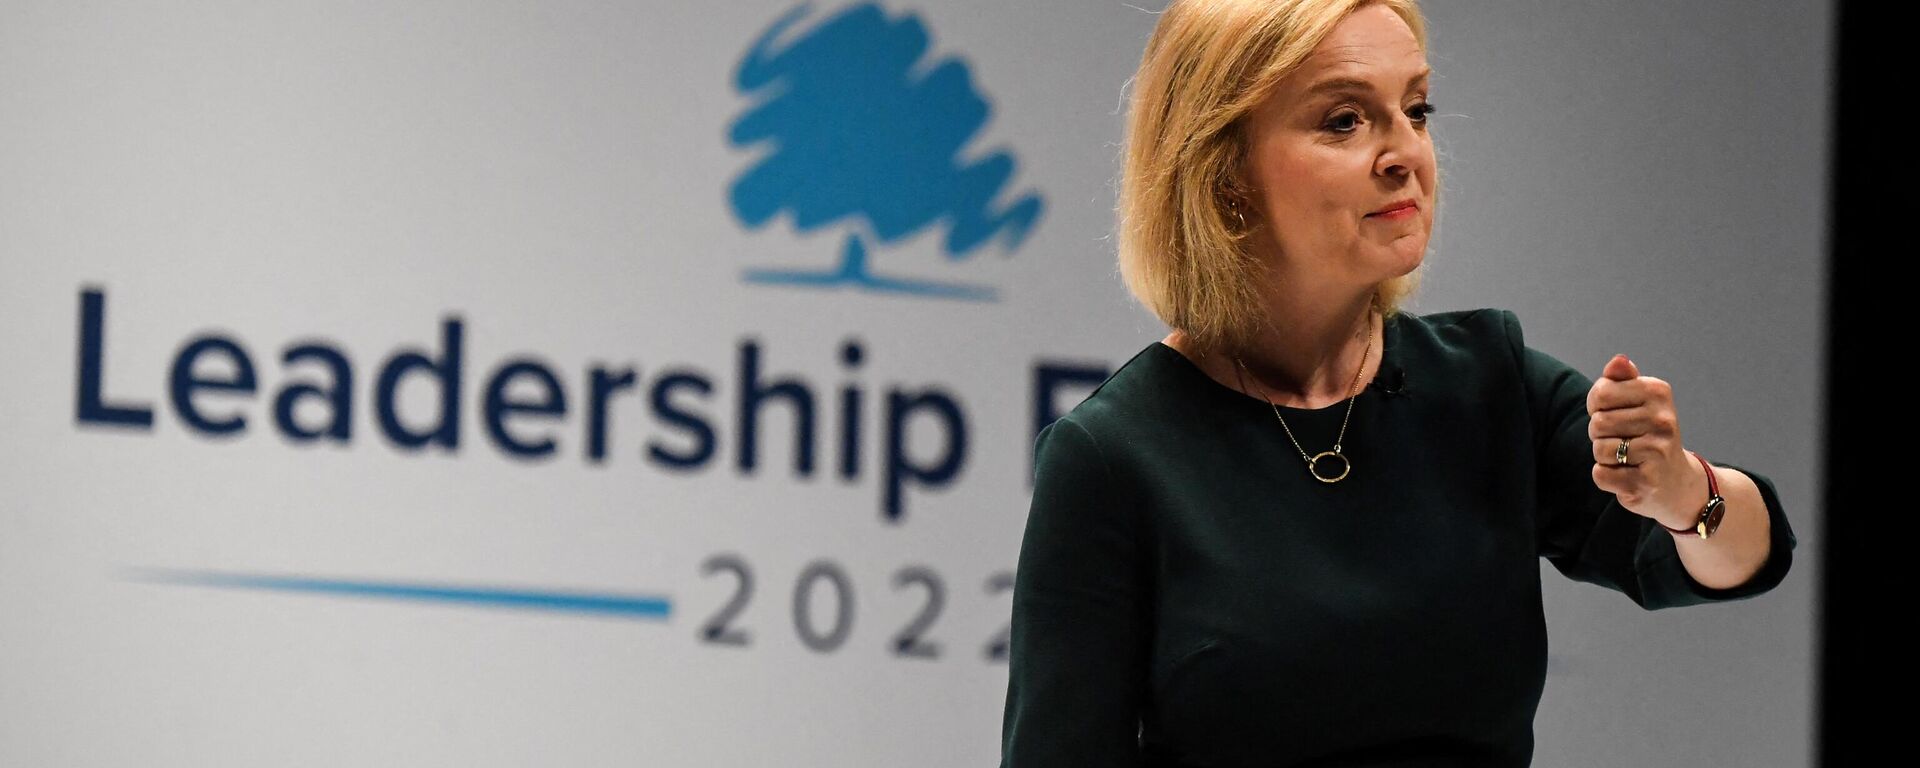 Contender to become the country's next Prime minister and leader of the Conservative party British Foreign Secretary Liz Truss speaks during a Conservative Party Hustings event in Perth, on August 16, 2022 - Sputnik International, 1920, 02.10.2022